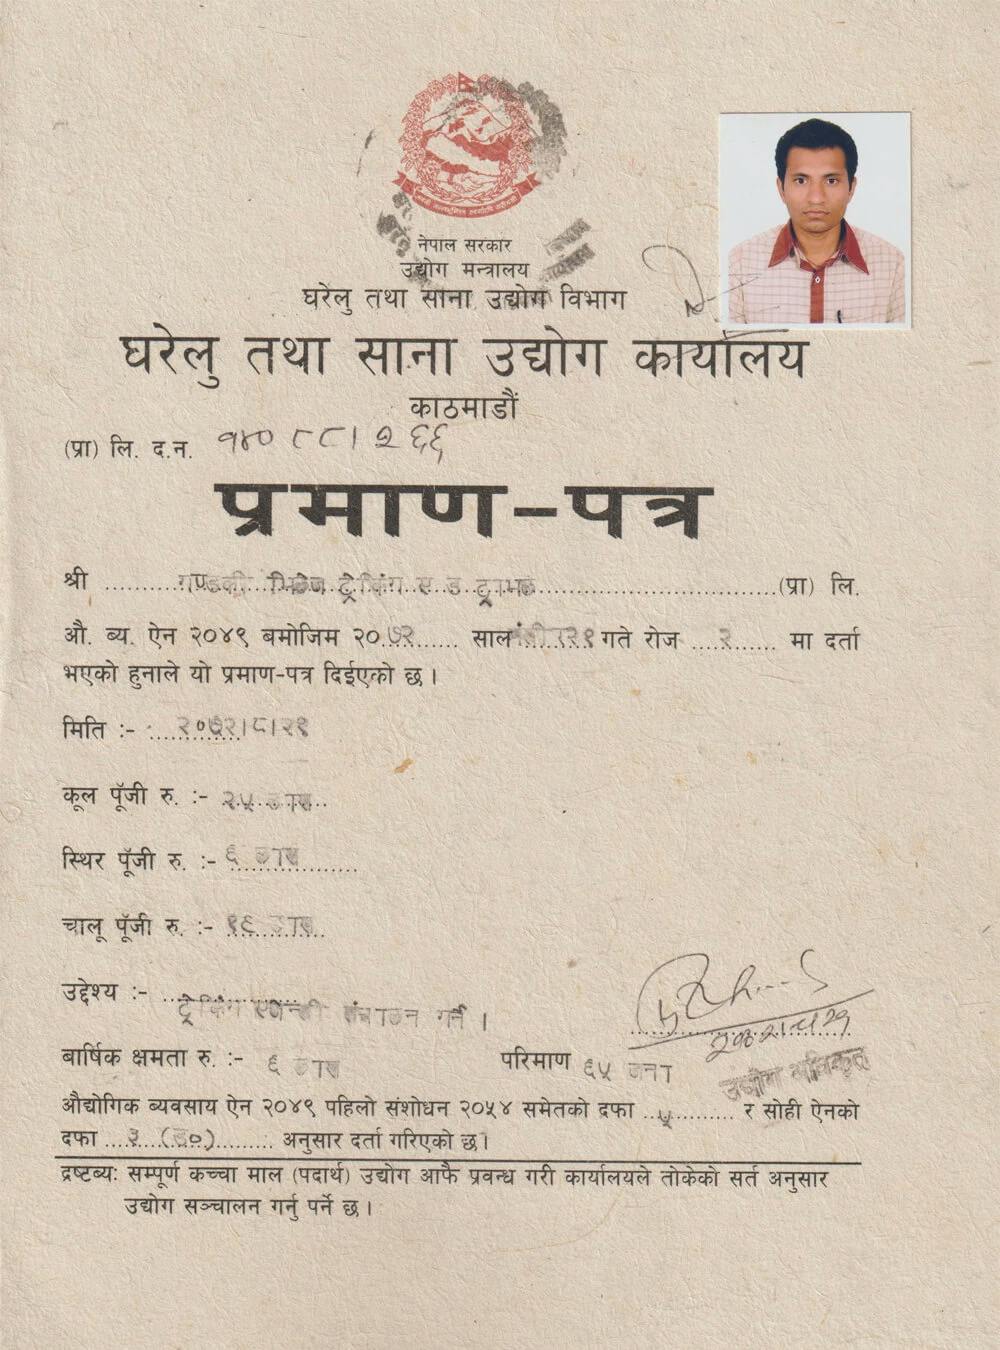 Certificate of Cottage and Small Industries